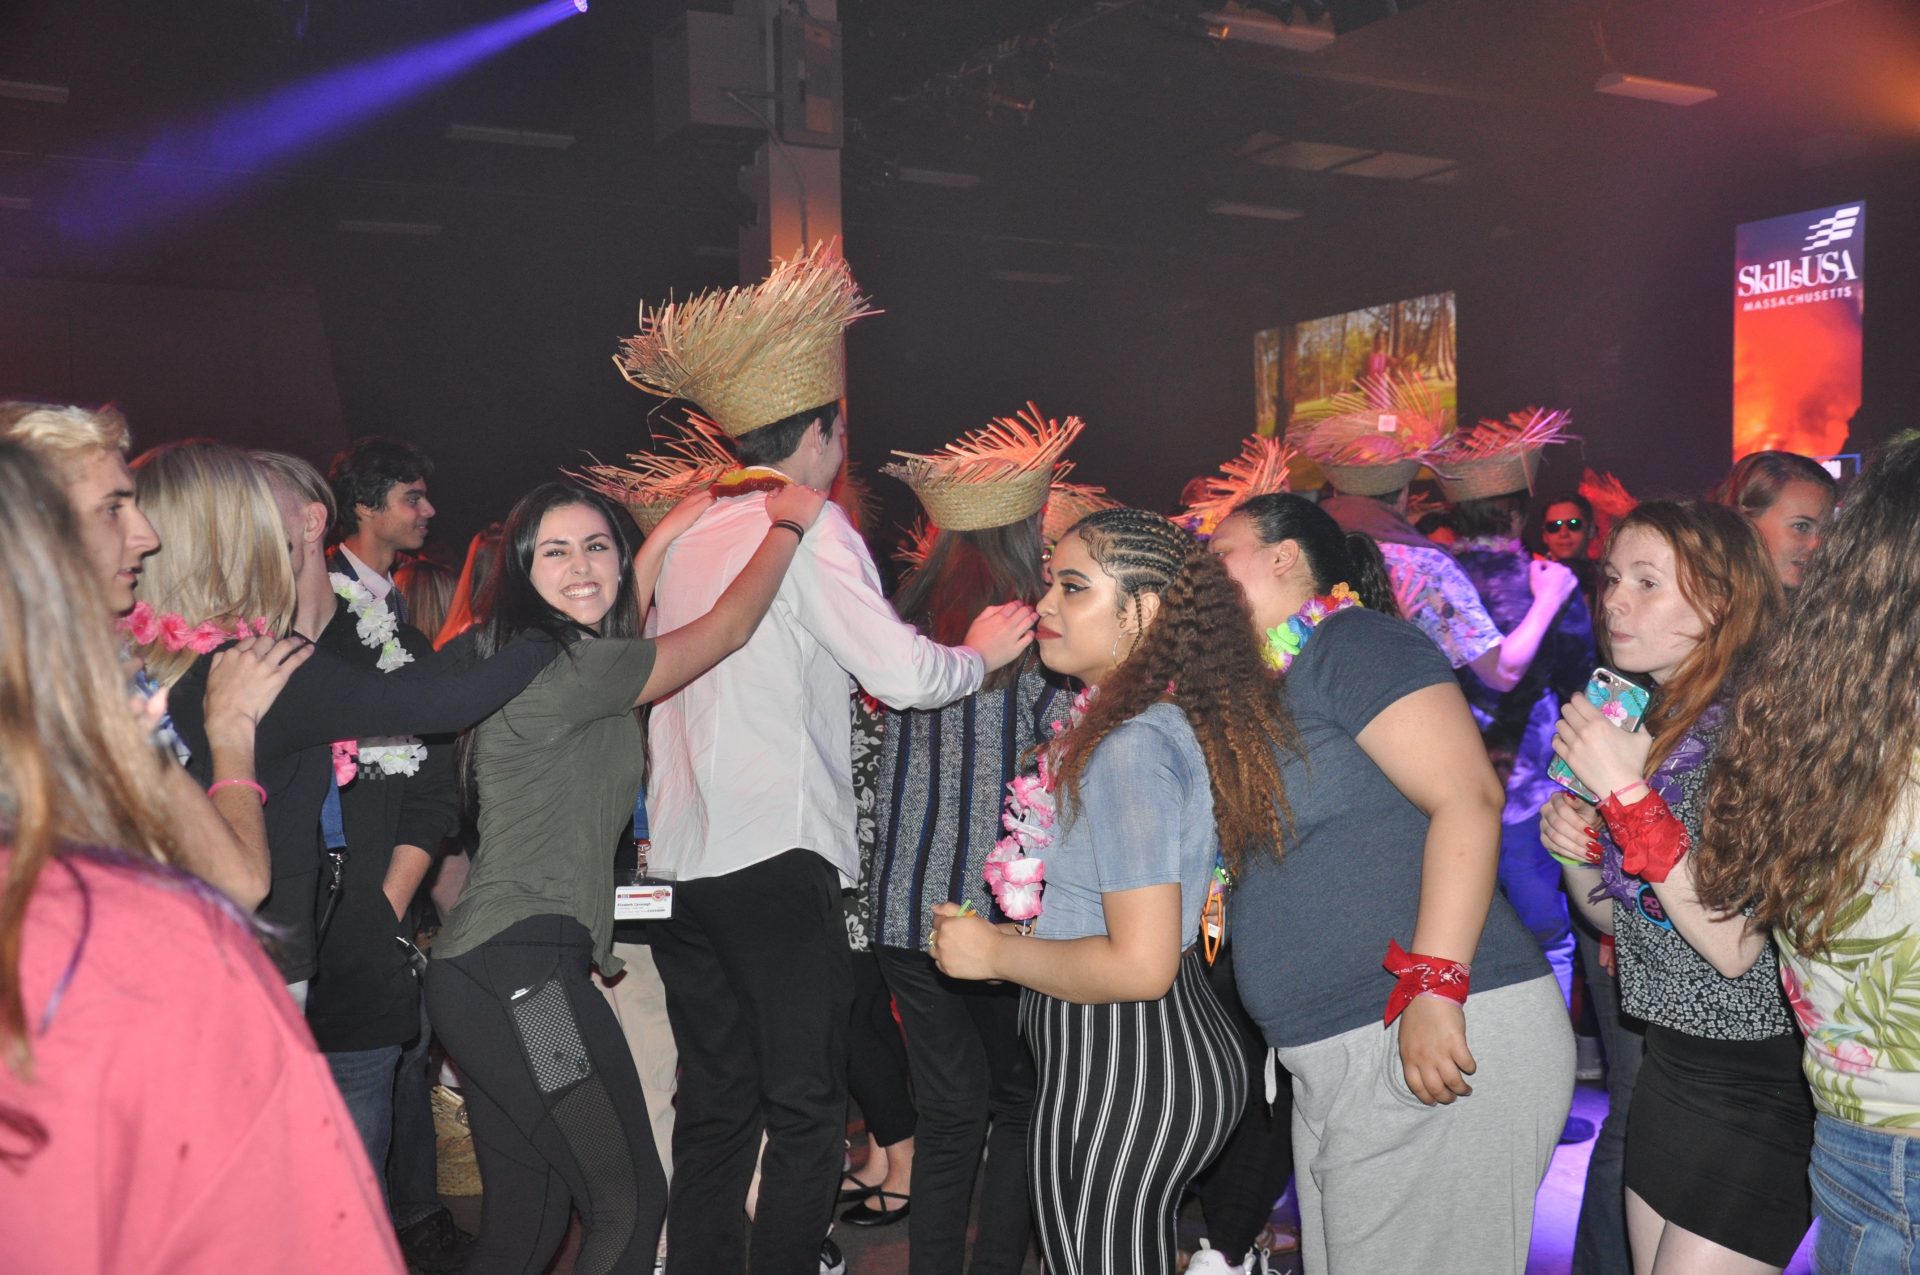 Students forming a conga line at the Hawaiian-themed party